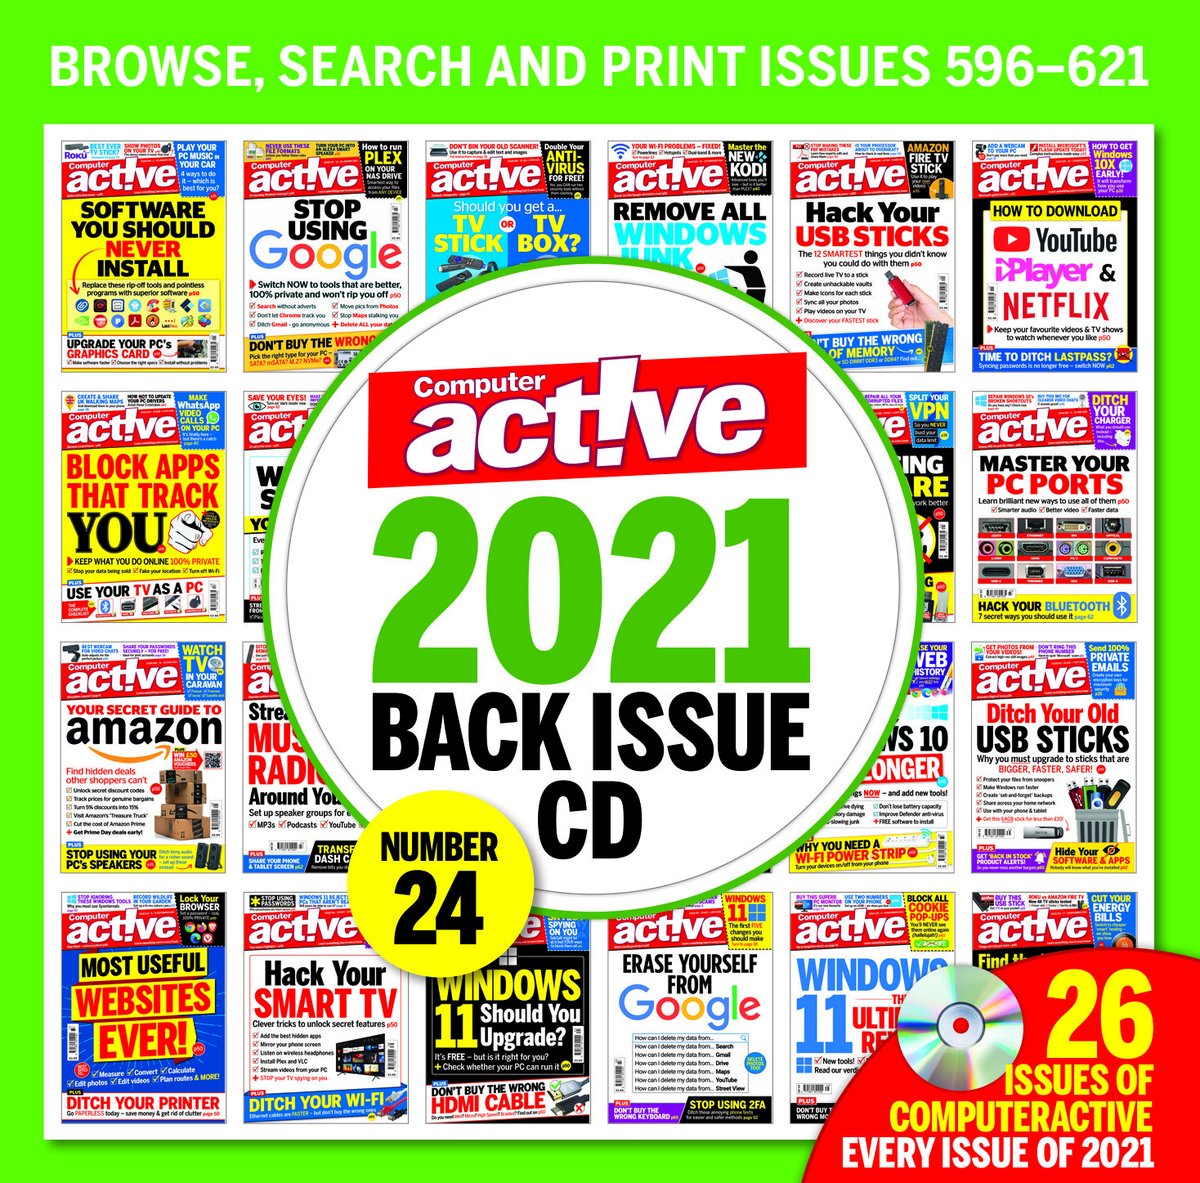 Delighted to say that our 2021 Back Issue CD is now on sale - apologies for the delay. You can buy it from snipca.com/42077